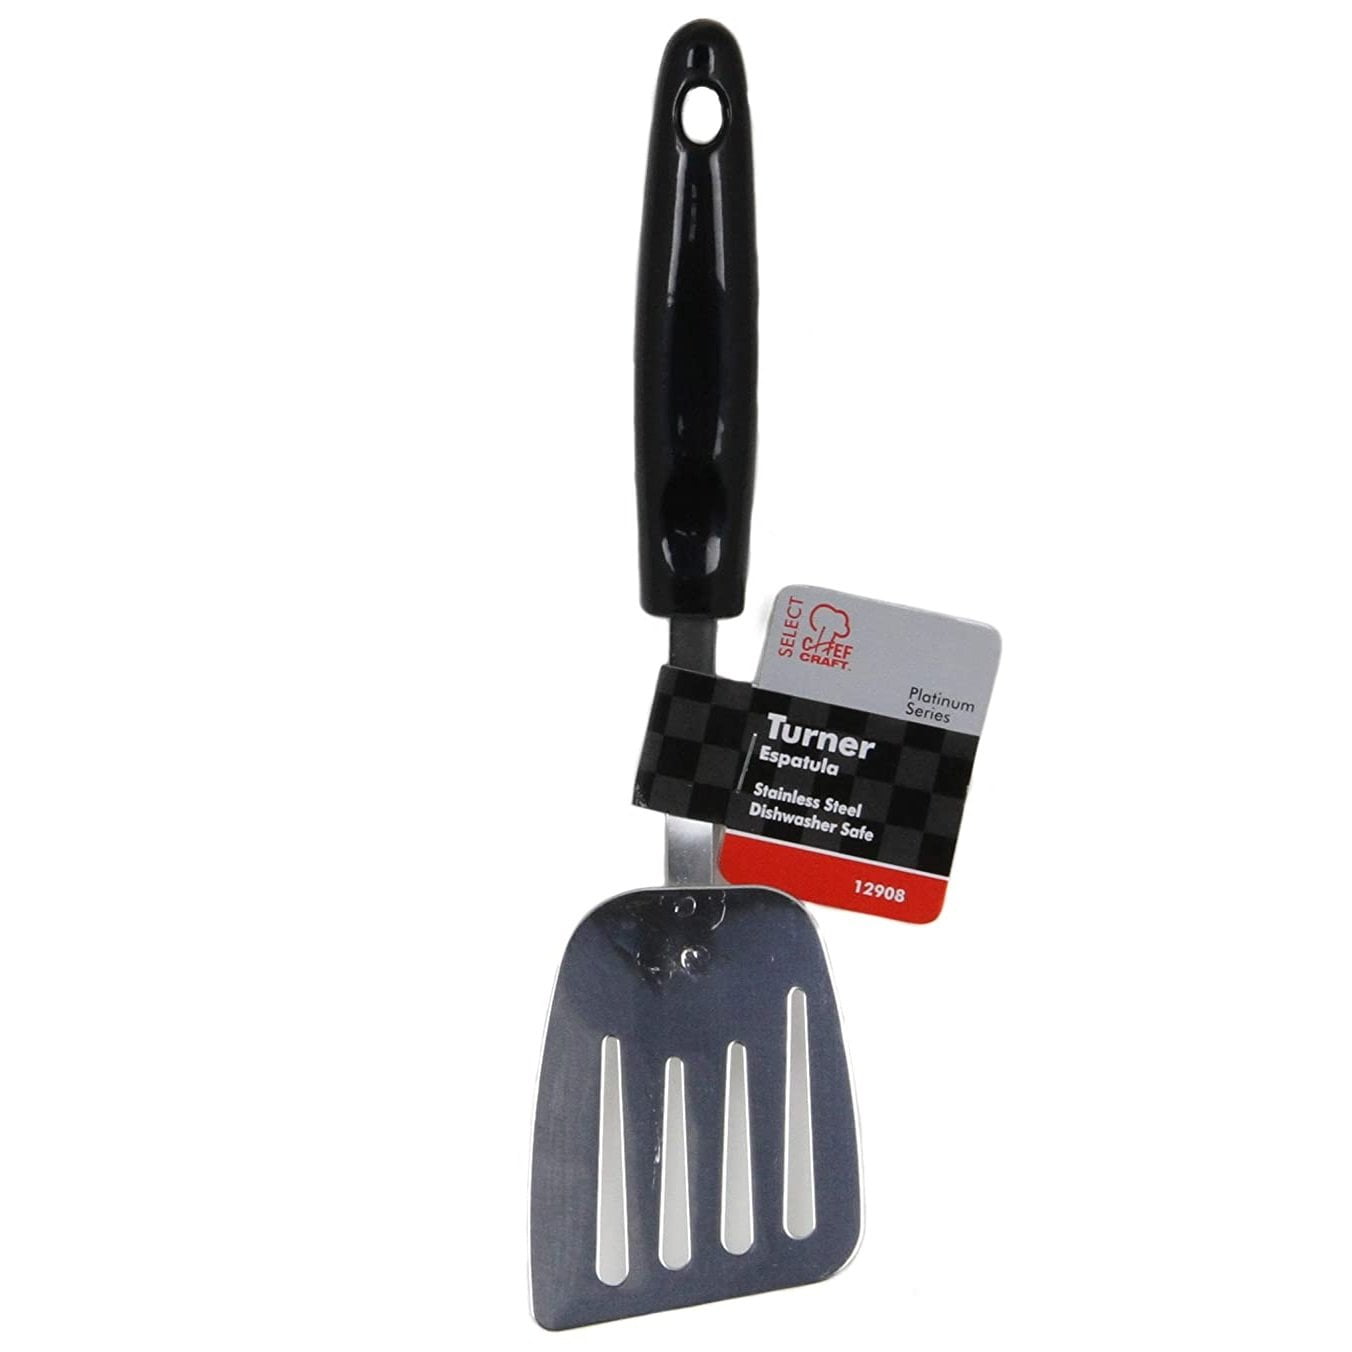  Mini Spatula 3.5 Stainless Steel Blade, Beveled Edge,  Contoured Black Plastic Handle, Dishwasher Safe. Ideal for Cookies, Desert,  Lasagna, Cutting, Spreading, Small Dishes: Home & Kitchen